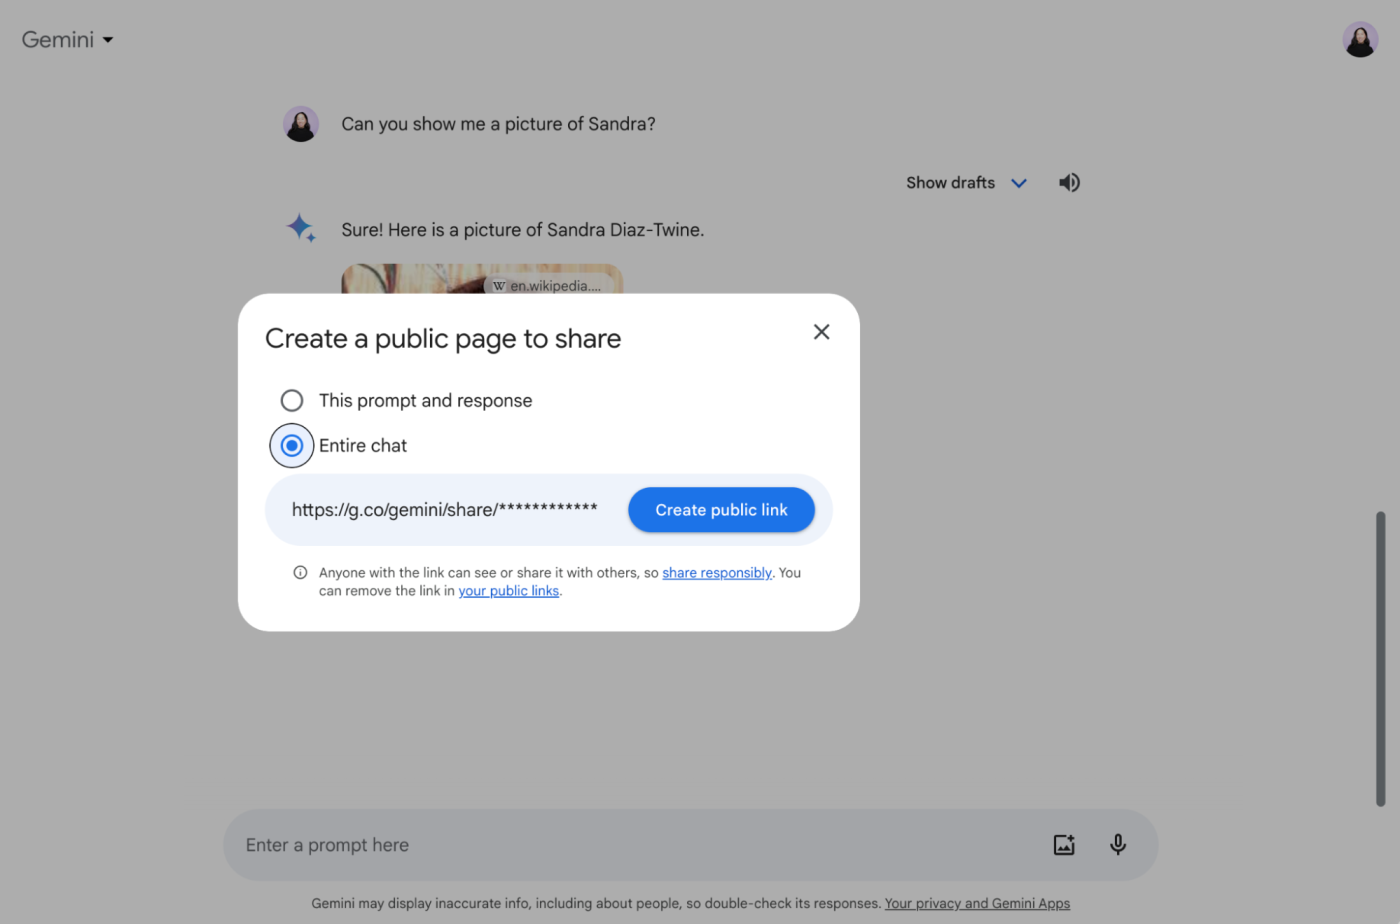 Popup in Gemini with options to share a prompt and response or entire chat by creating a public link.